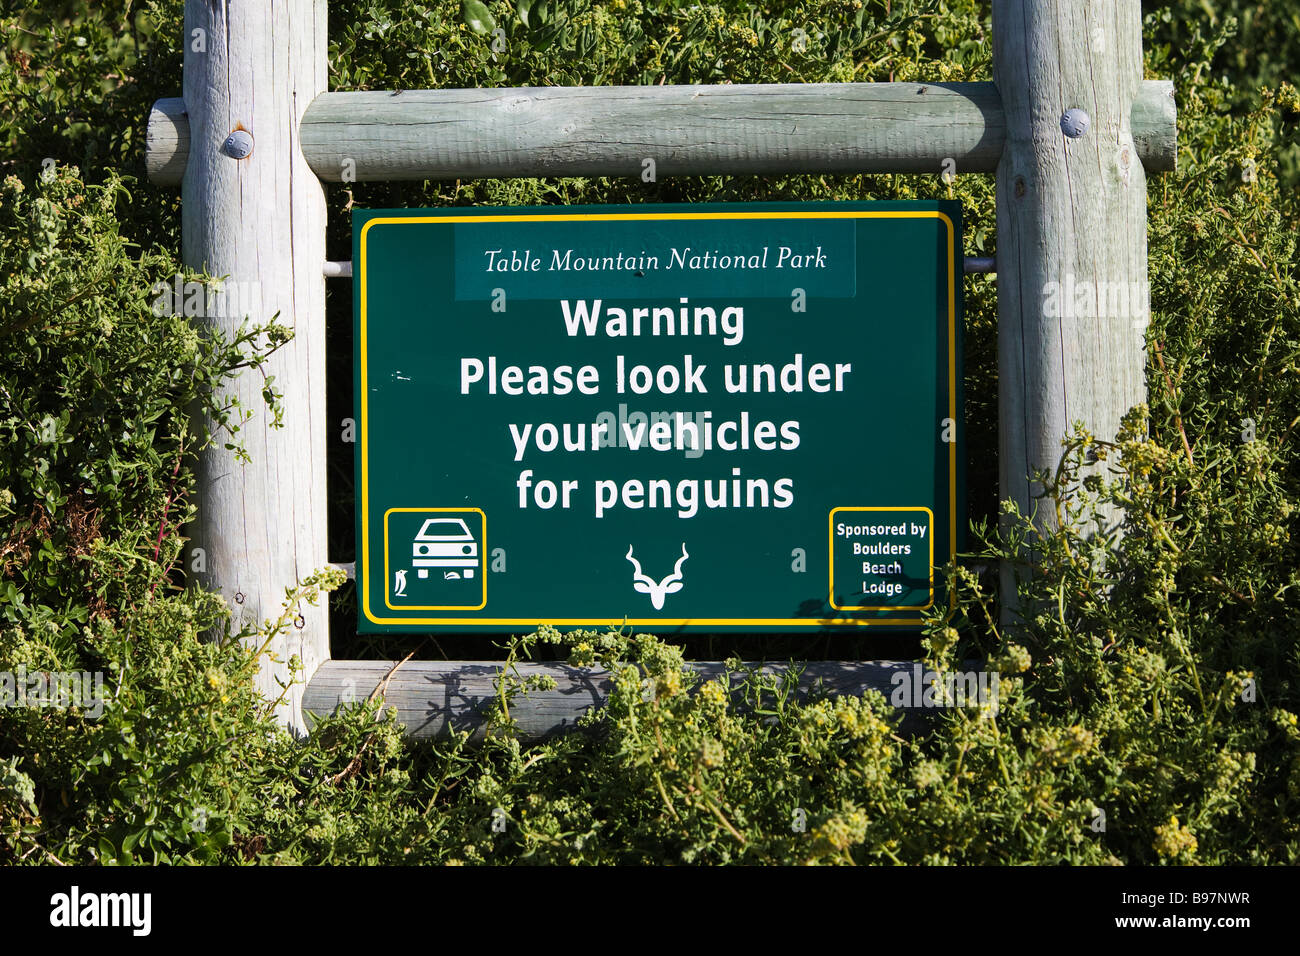 African penguin warning sign Spheniscus demersus Table Mountain National park Cape Town South Africa Stock Photo